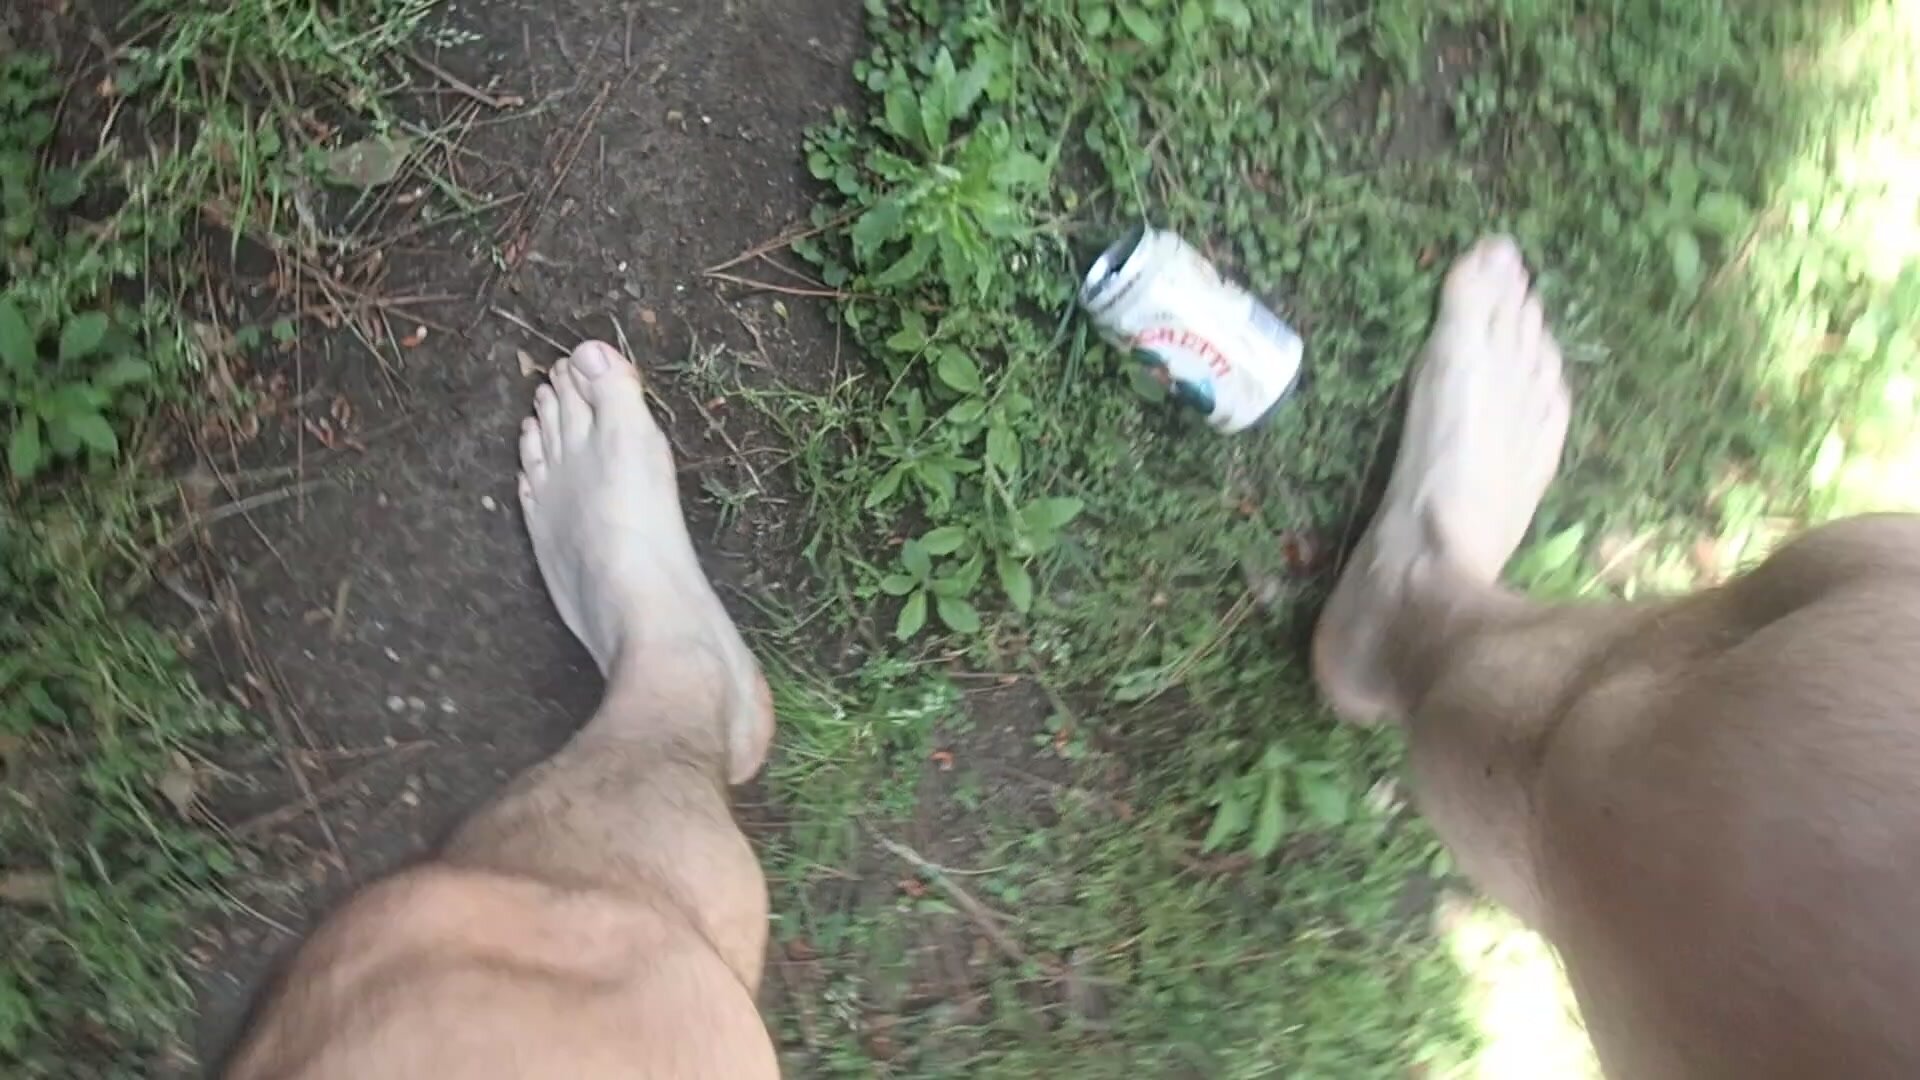 BAREFOOT CANS SMASHING ON GRASS